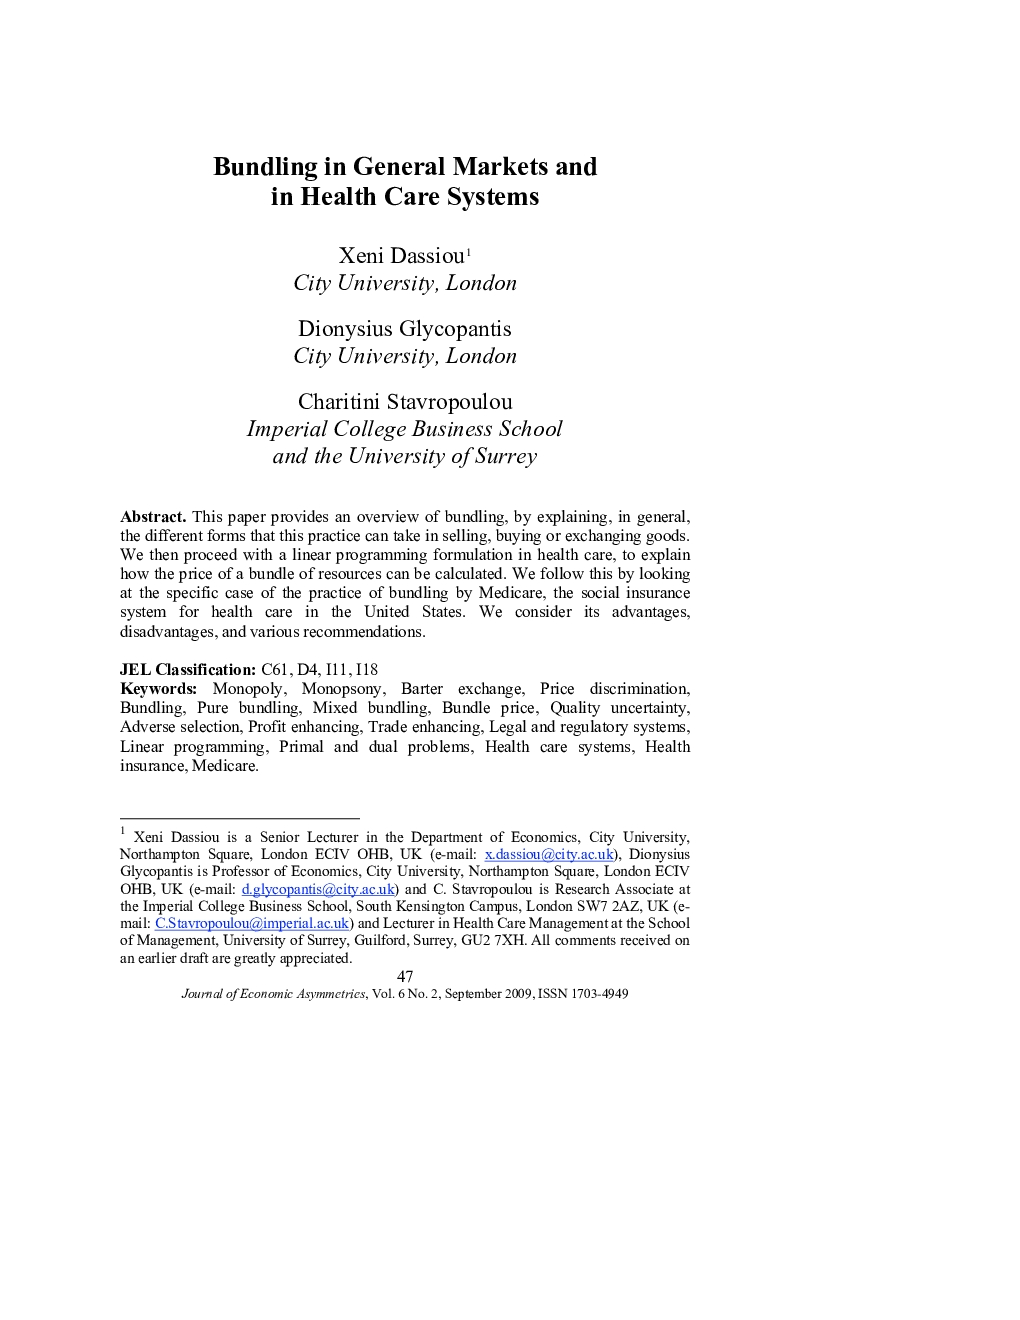 Bundling in General Markets and in Health Care Systems